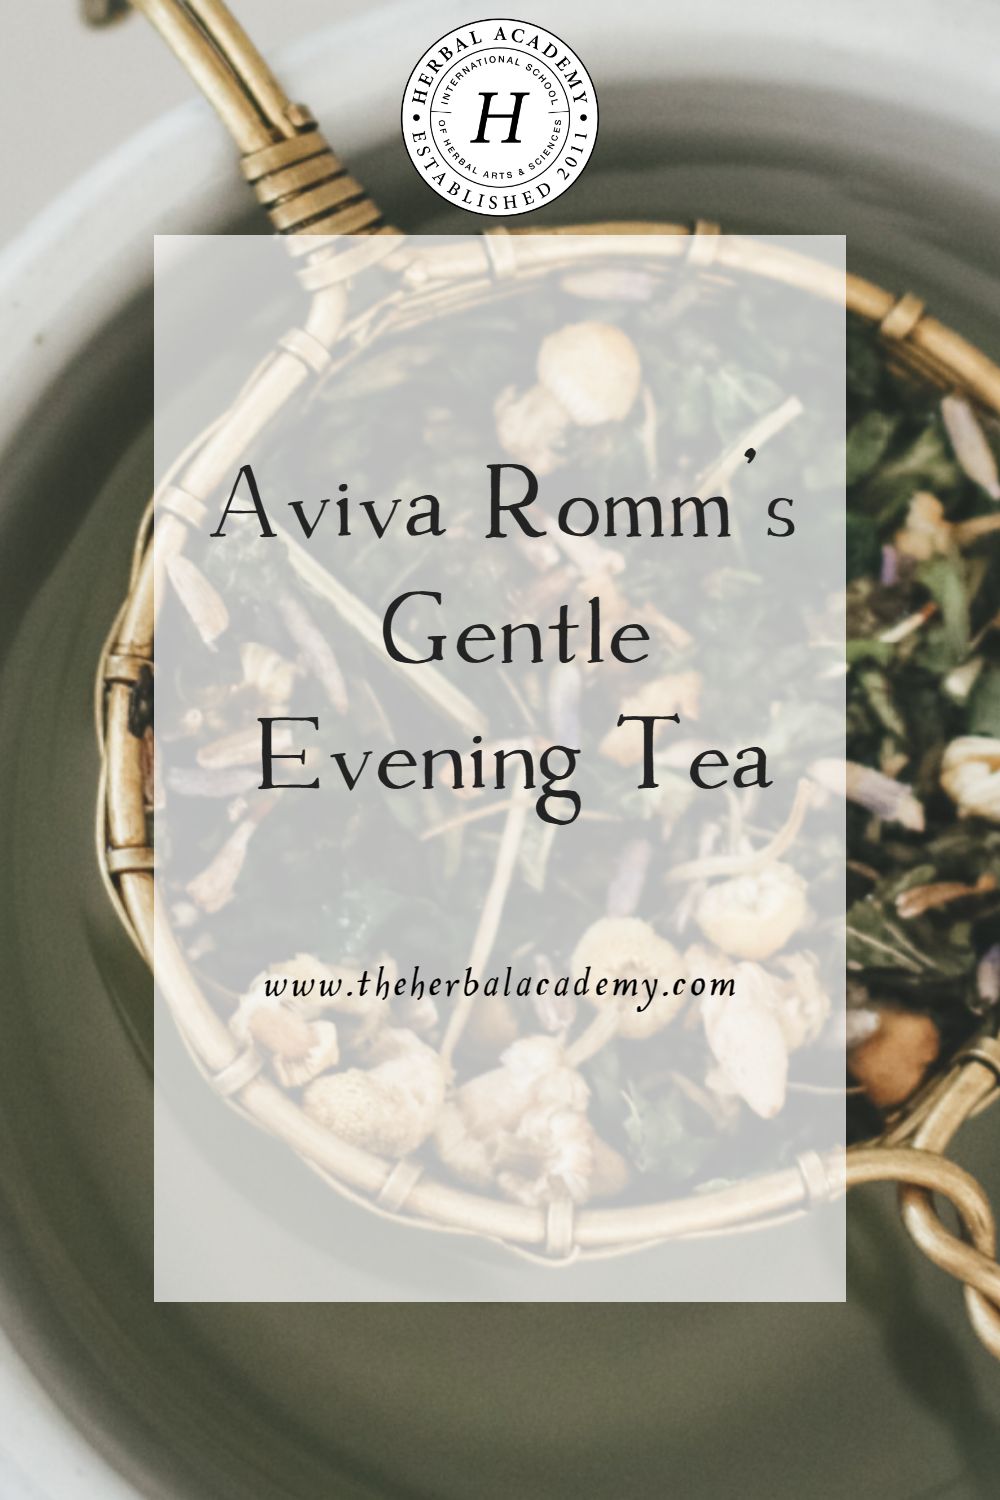 Aviva Romm’s Gentle Evening Tea | Herbal Academy | In this Gentle Evening Tea blend video, Aviva Romm includes three familiar herbs and shares her recipe with us.